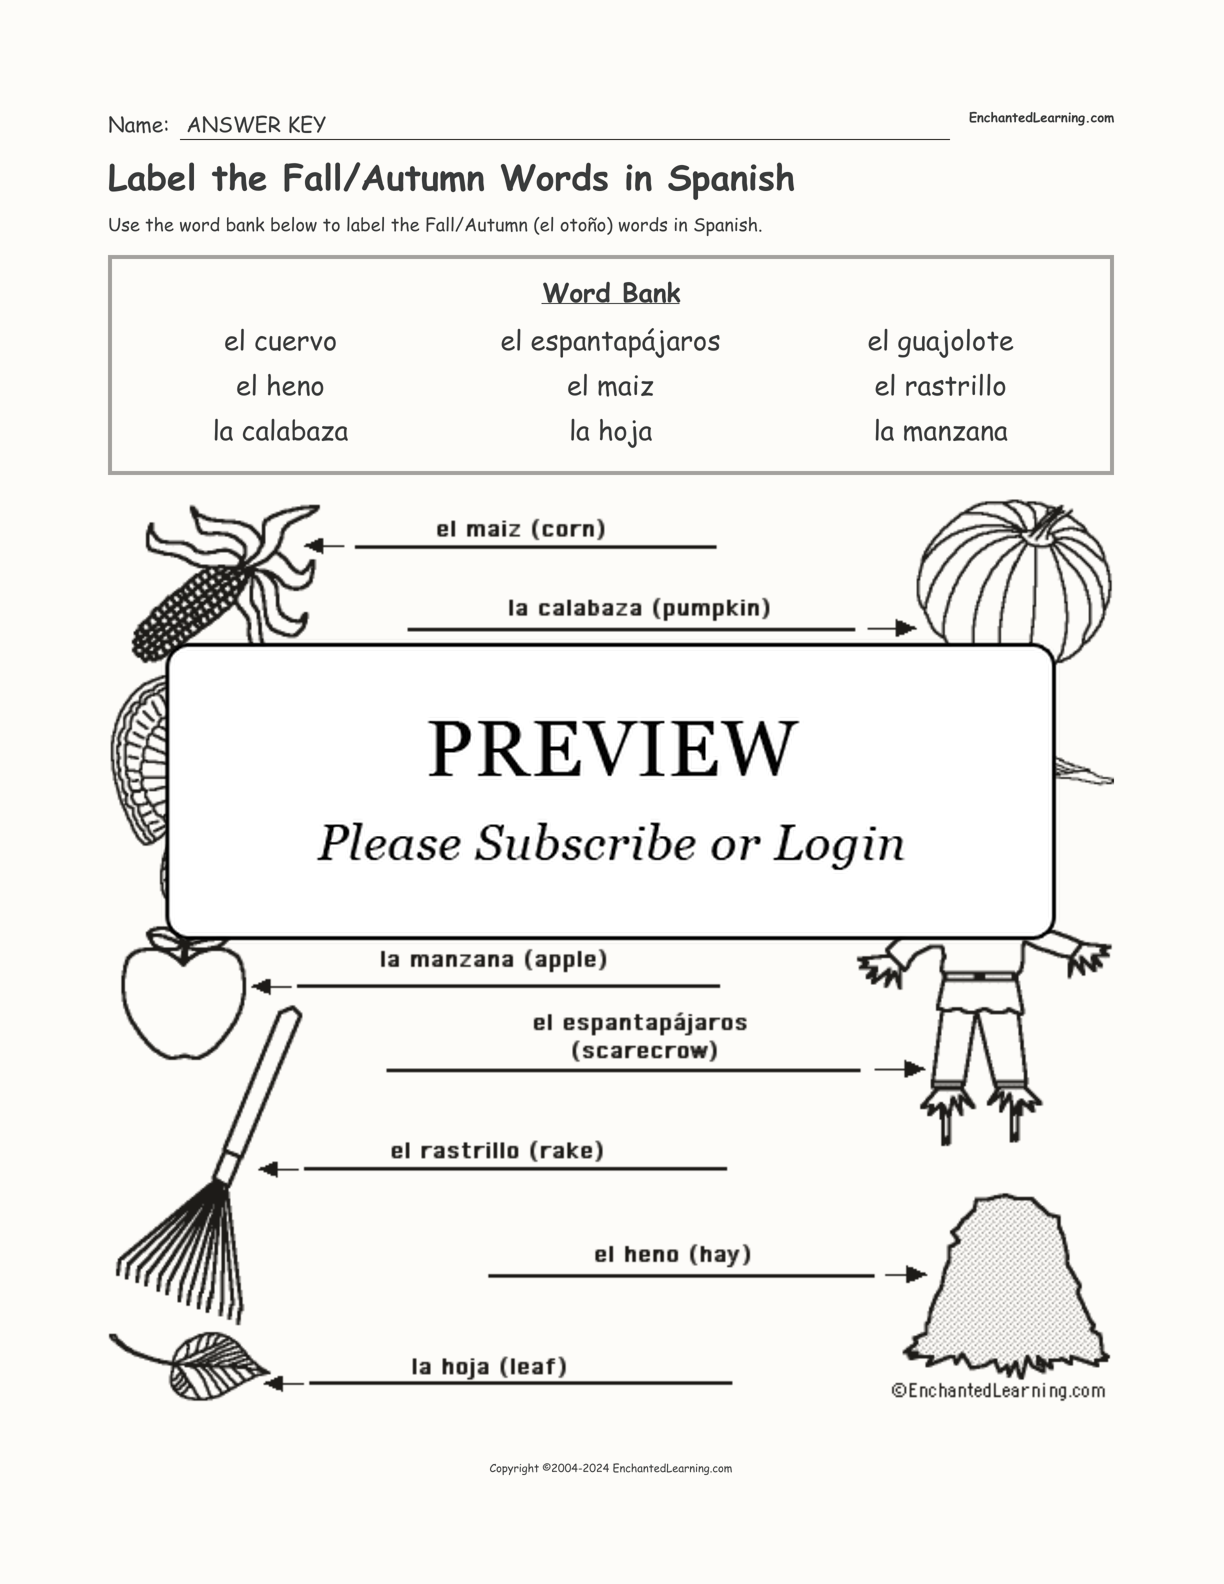 Label the Fall/Autumn Words in Spanish interactive worksheet page 2